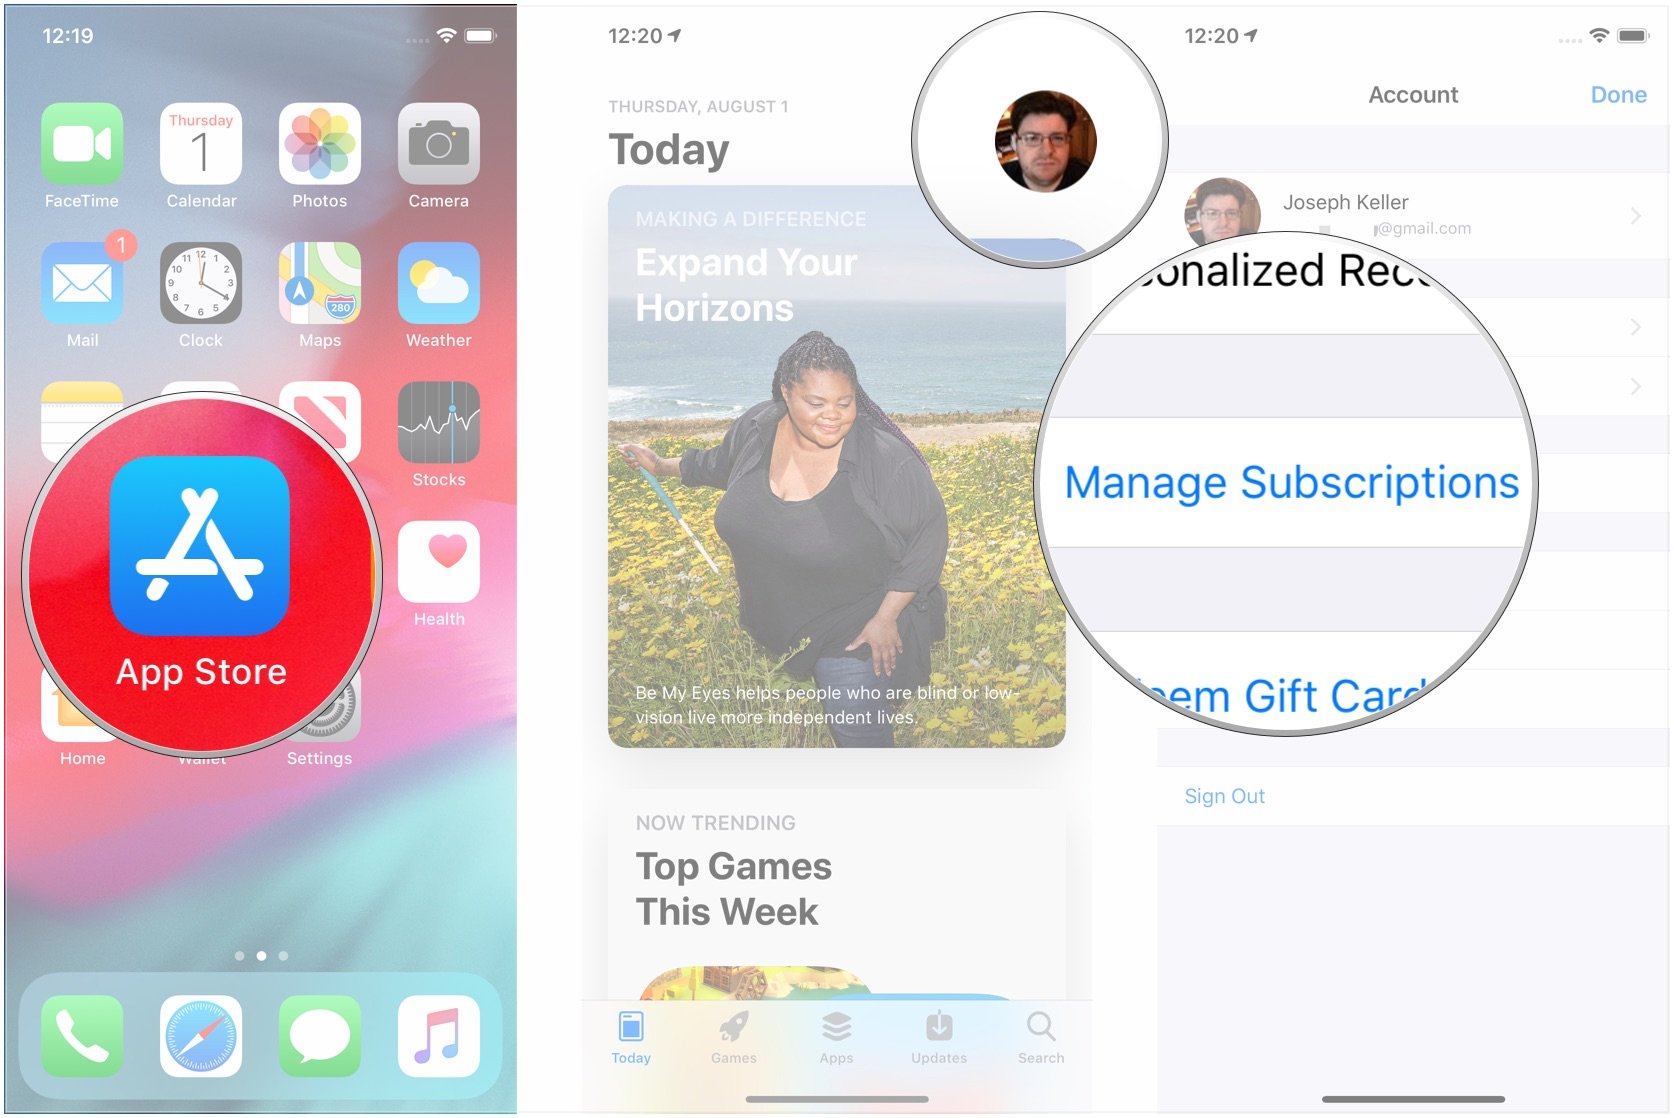 Open App Store, tap avatar, tap Manage Subscriptions